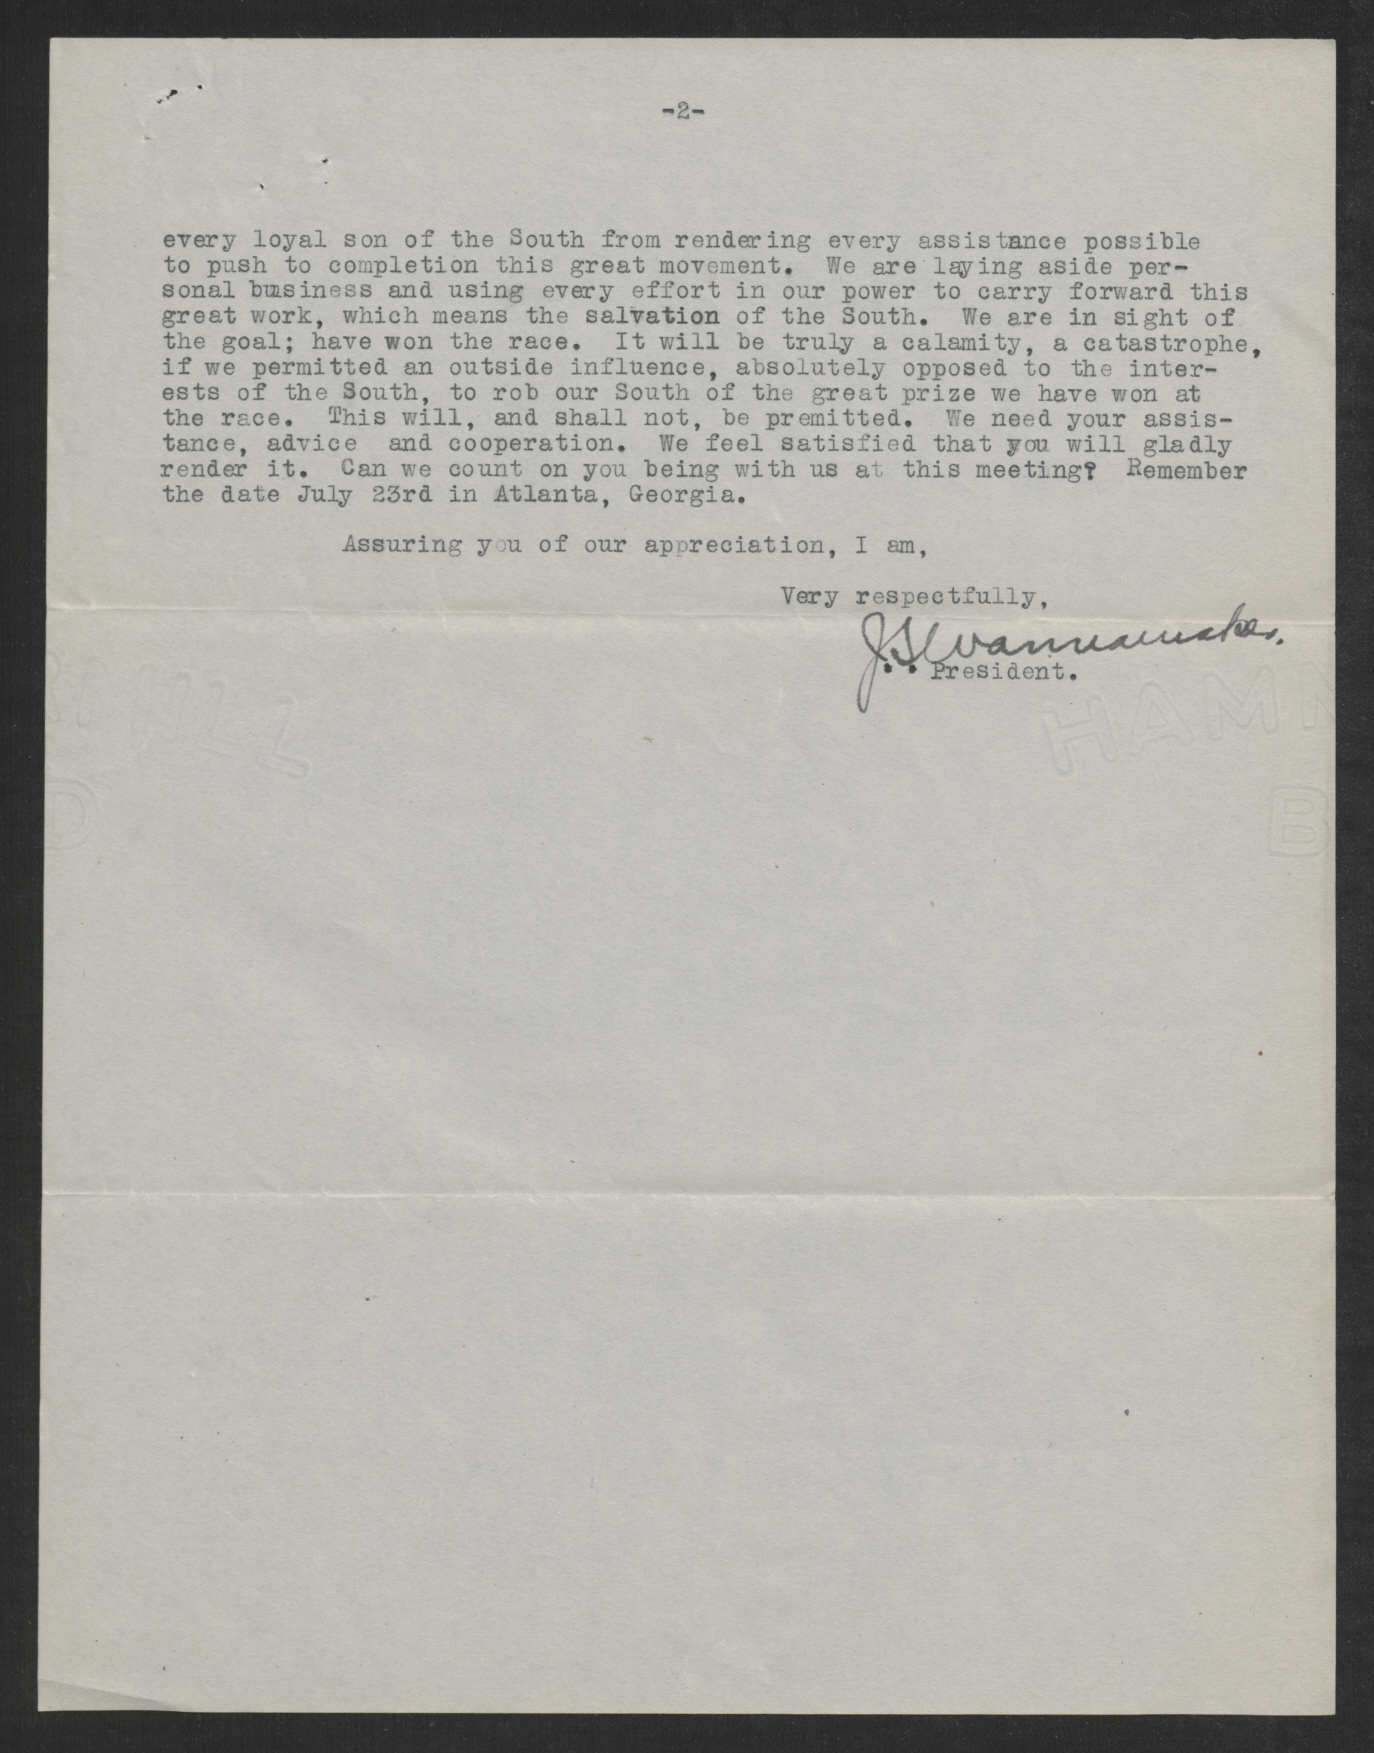 Letter from John S. Wannamaker to Thomas W. Bickett, July 15, 1919, page 2